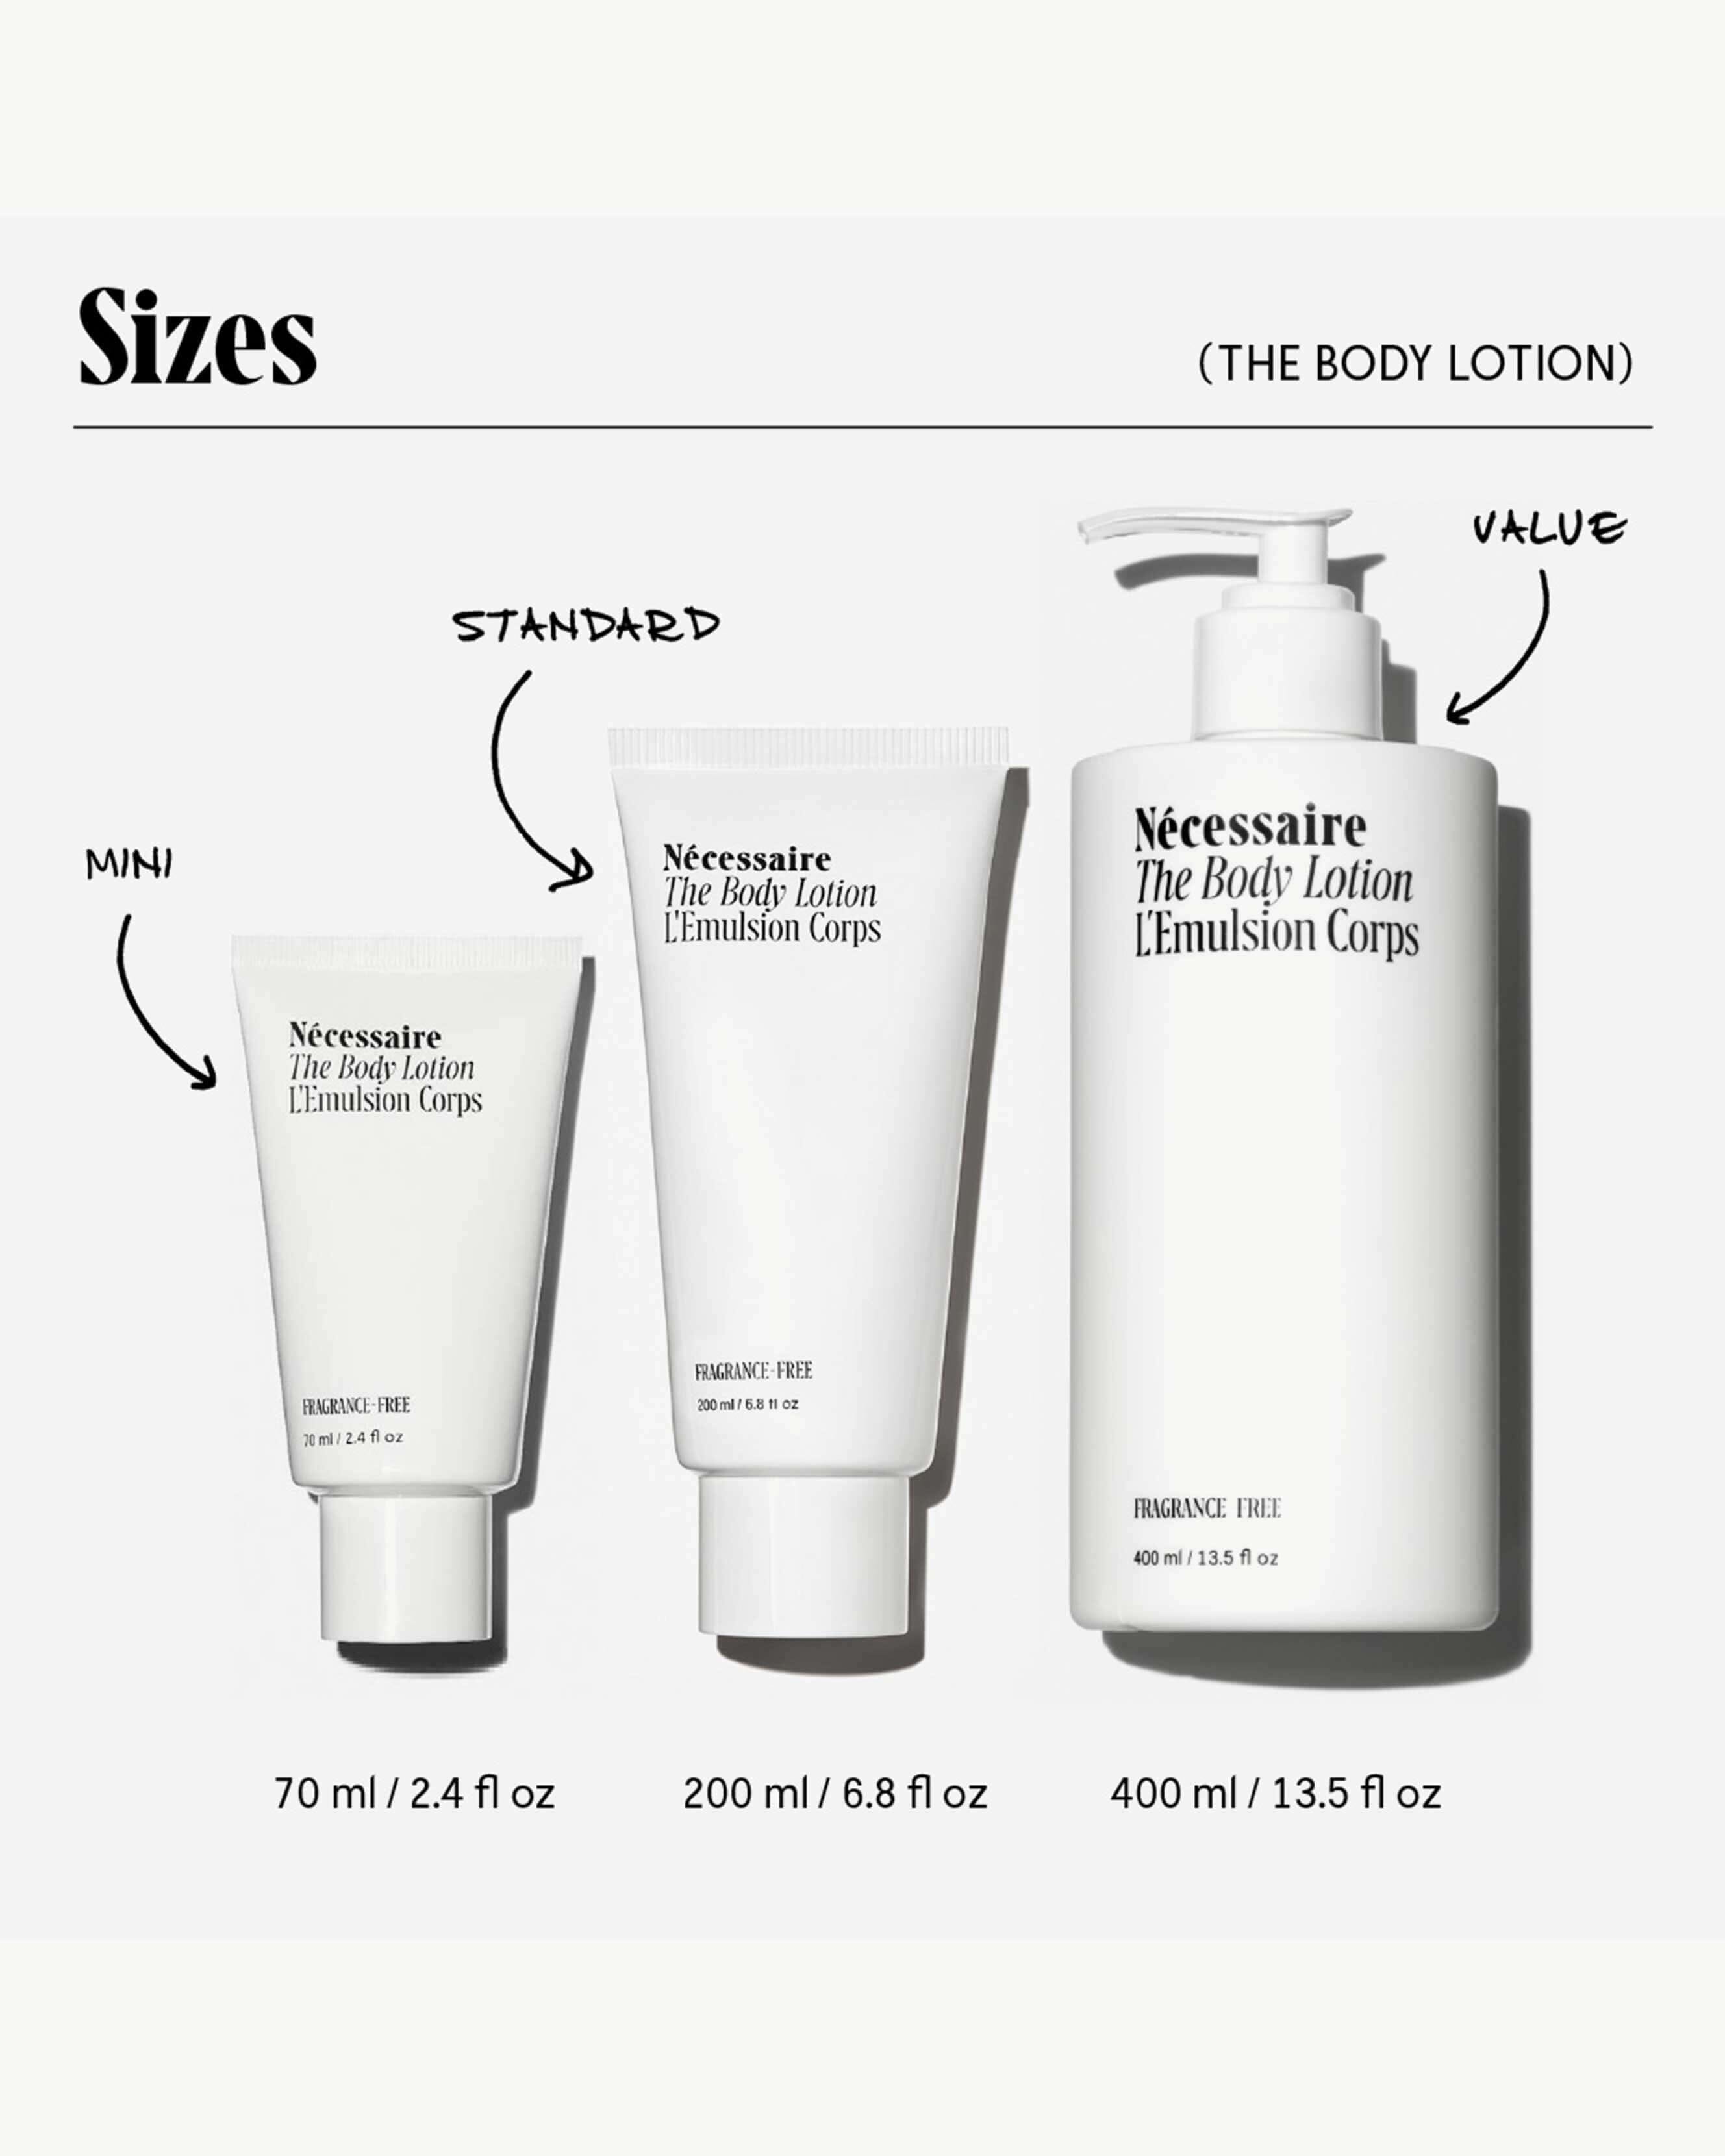 The Body Lotion